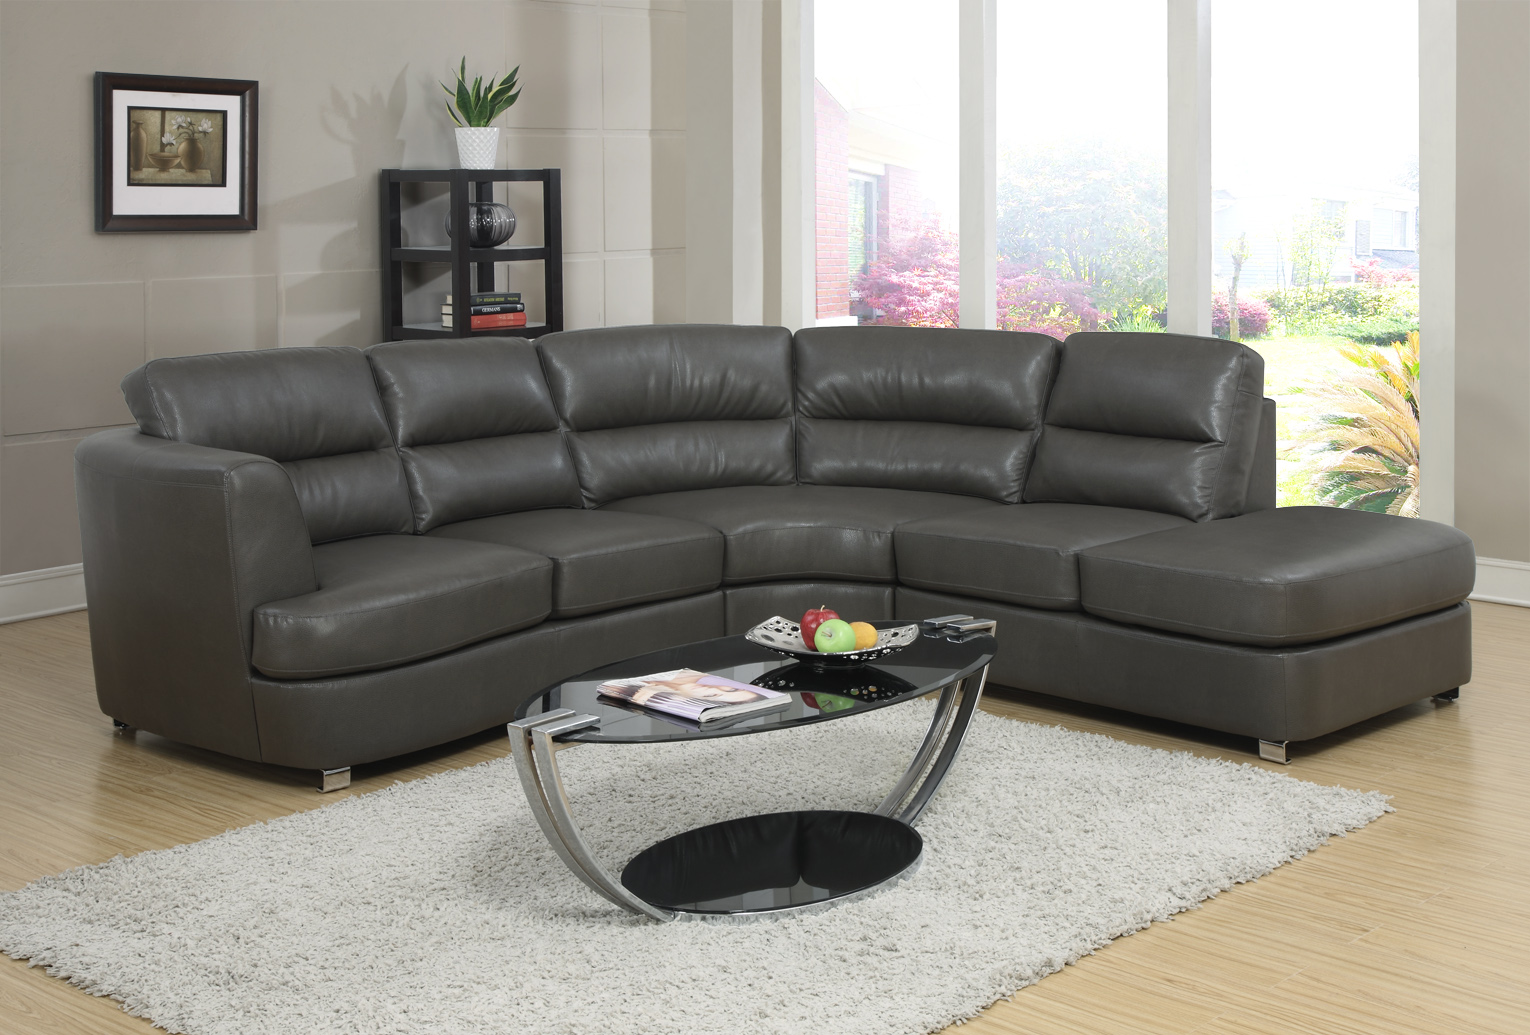 Monarch Specialties SOFA - SECTIONAL / DARK GREY BONDED LEATHER / MATCH